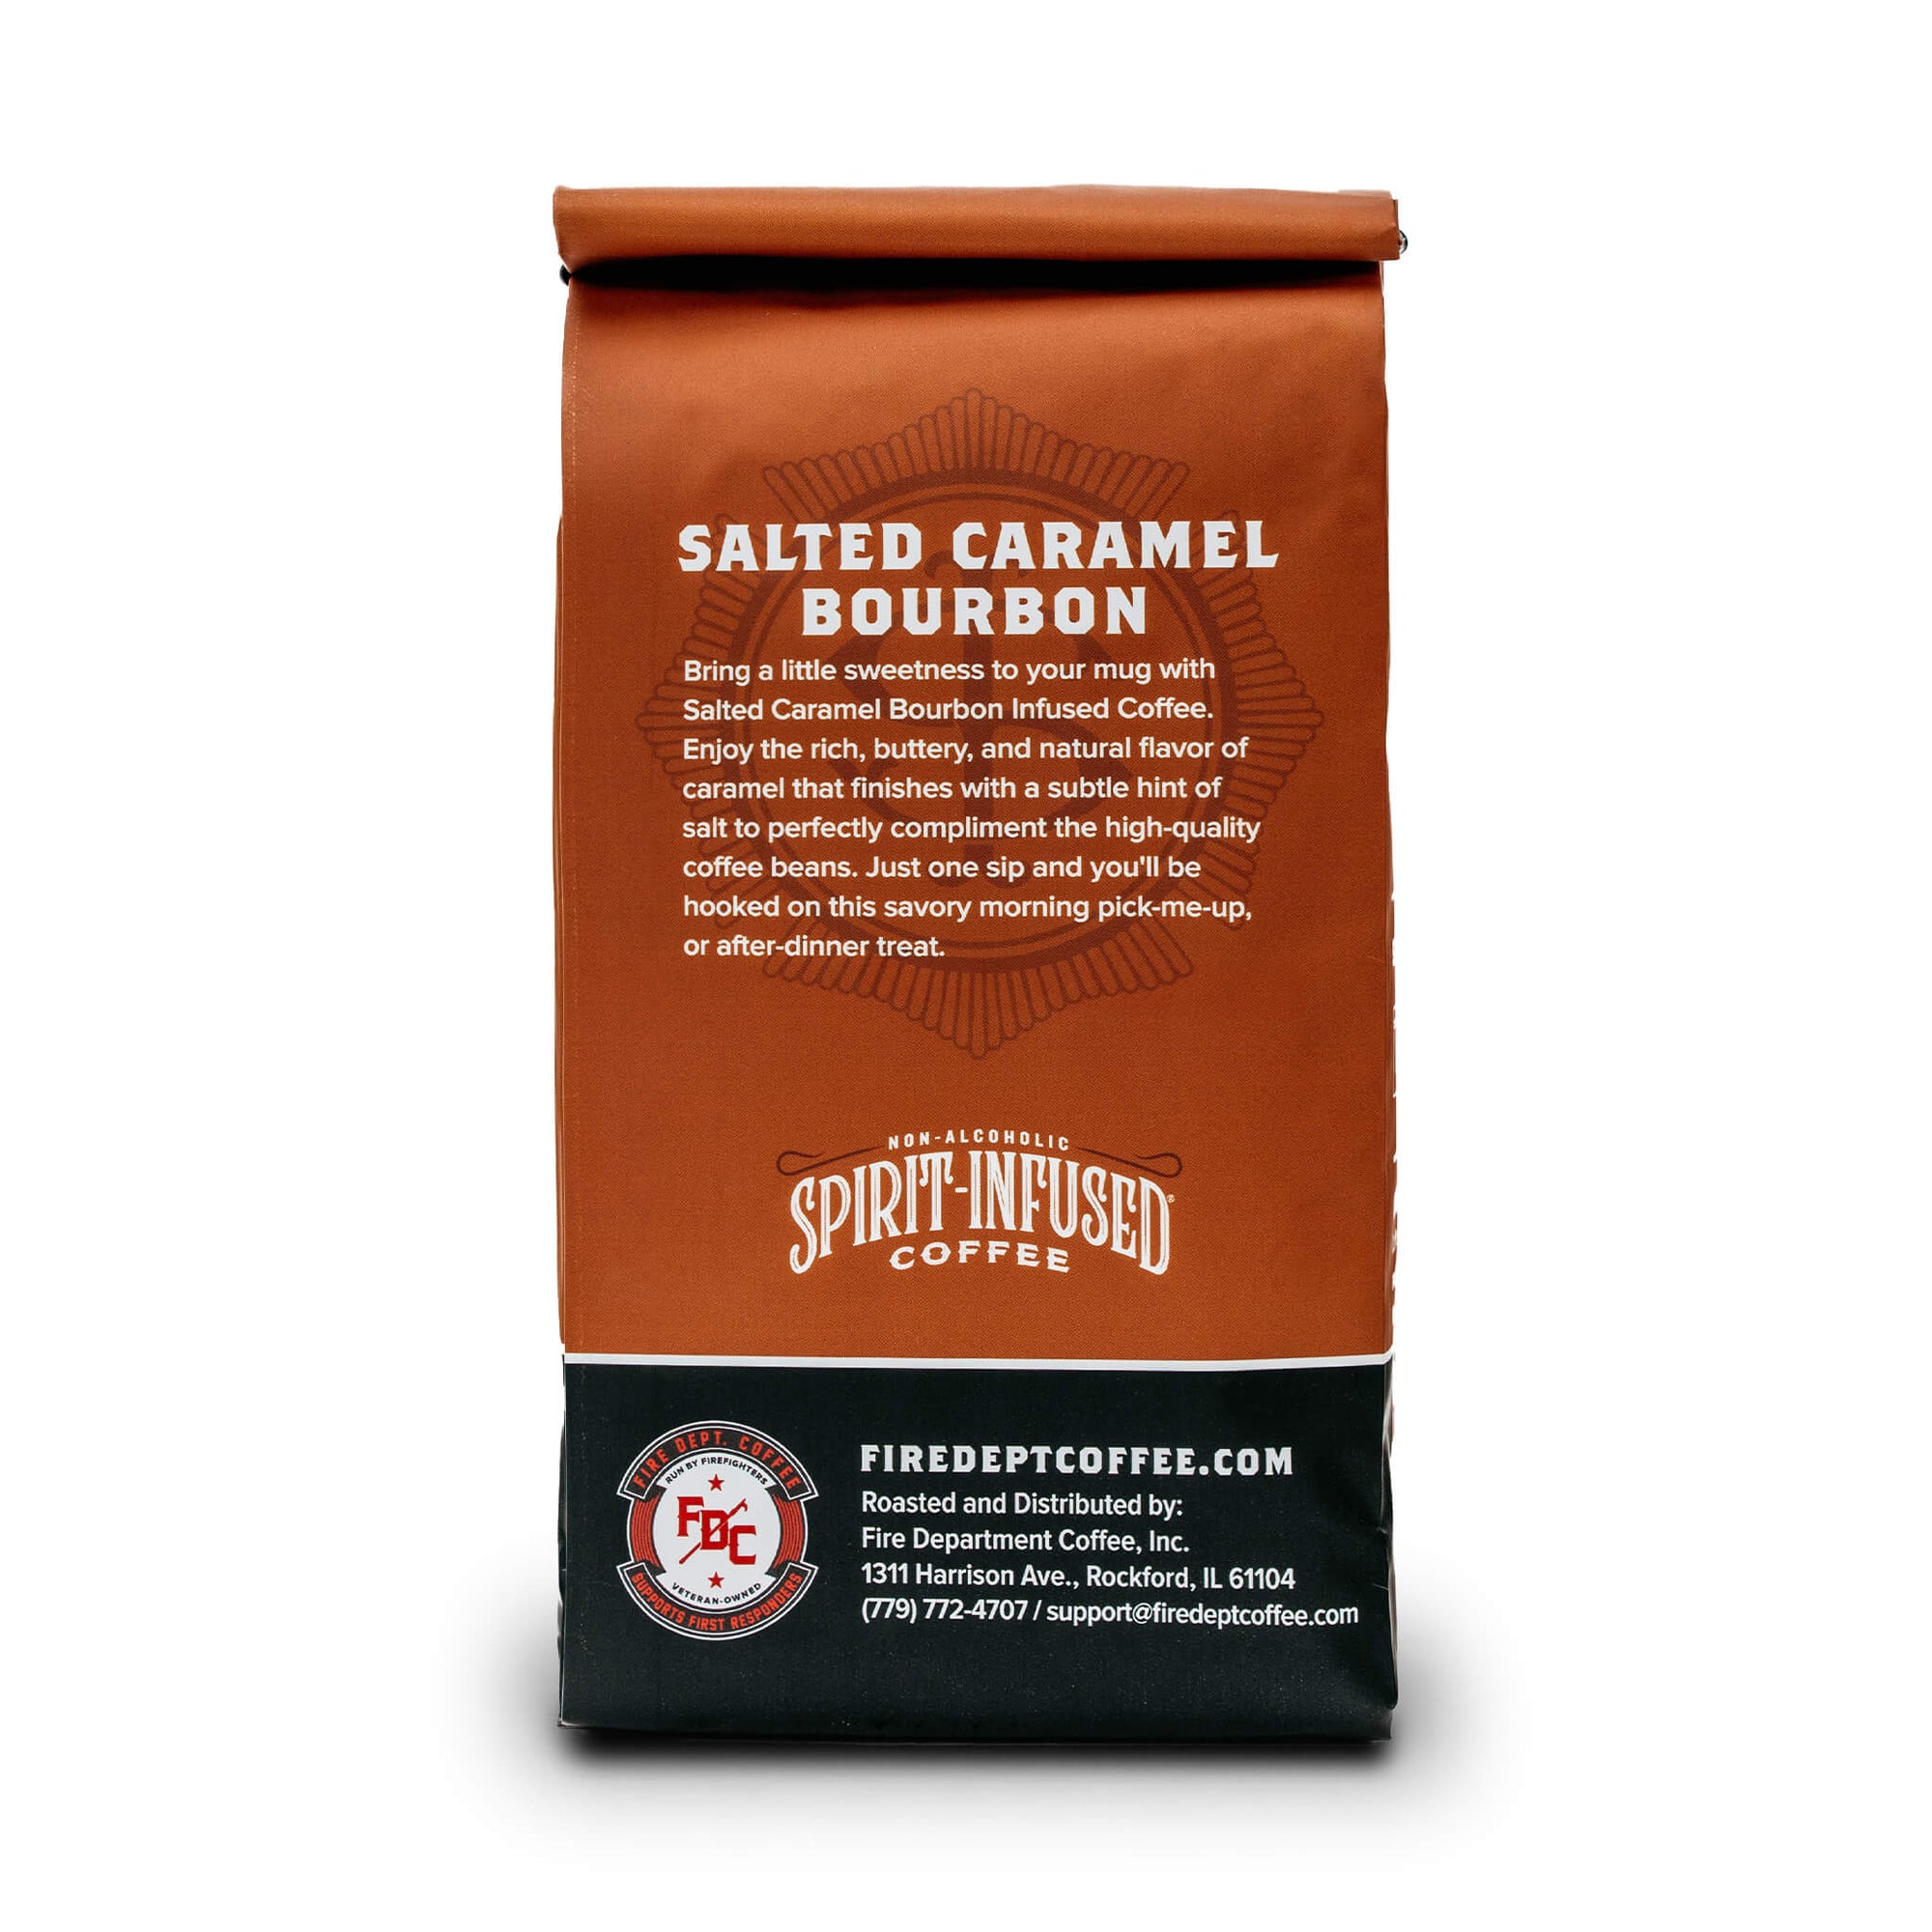 SALTED CARAMEL BOURBON INFUSED COFFEE